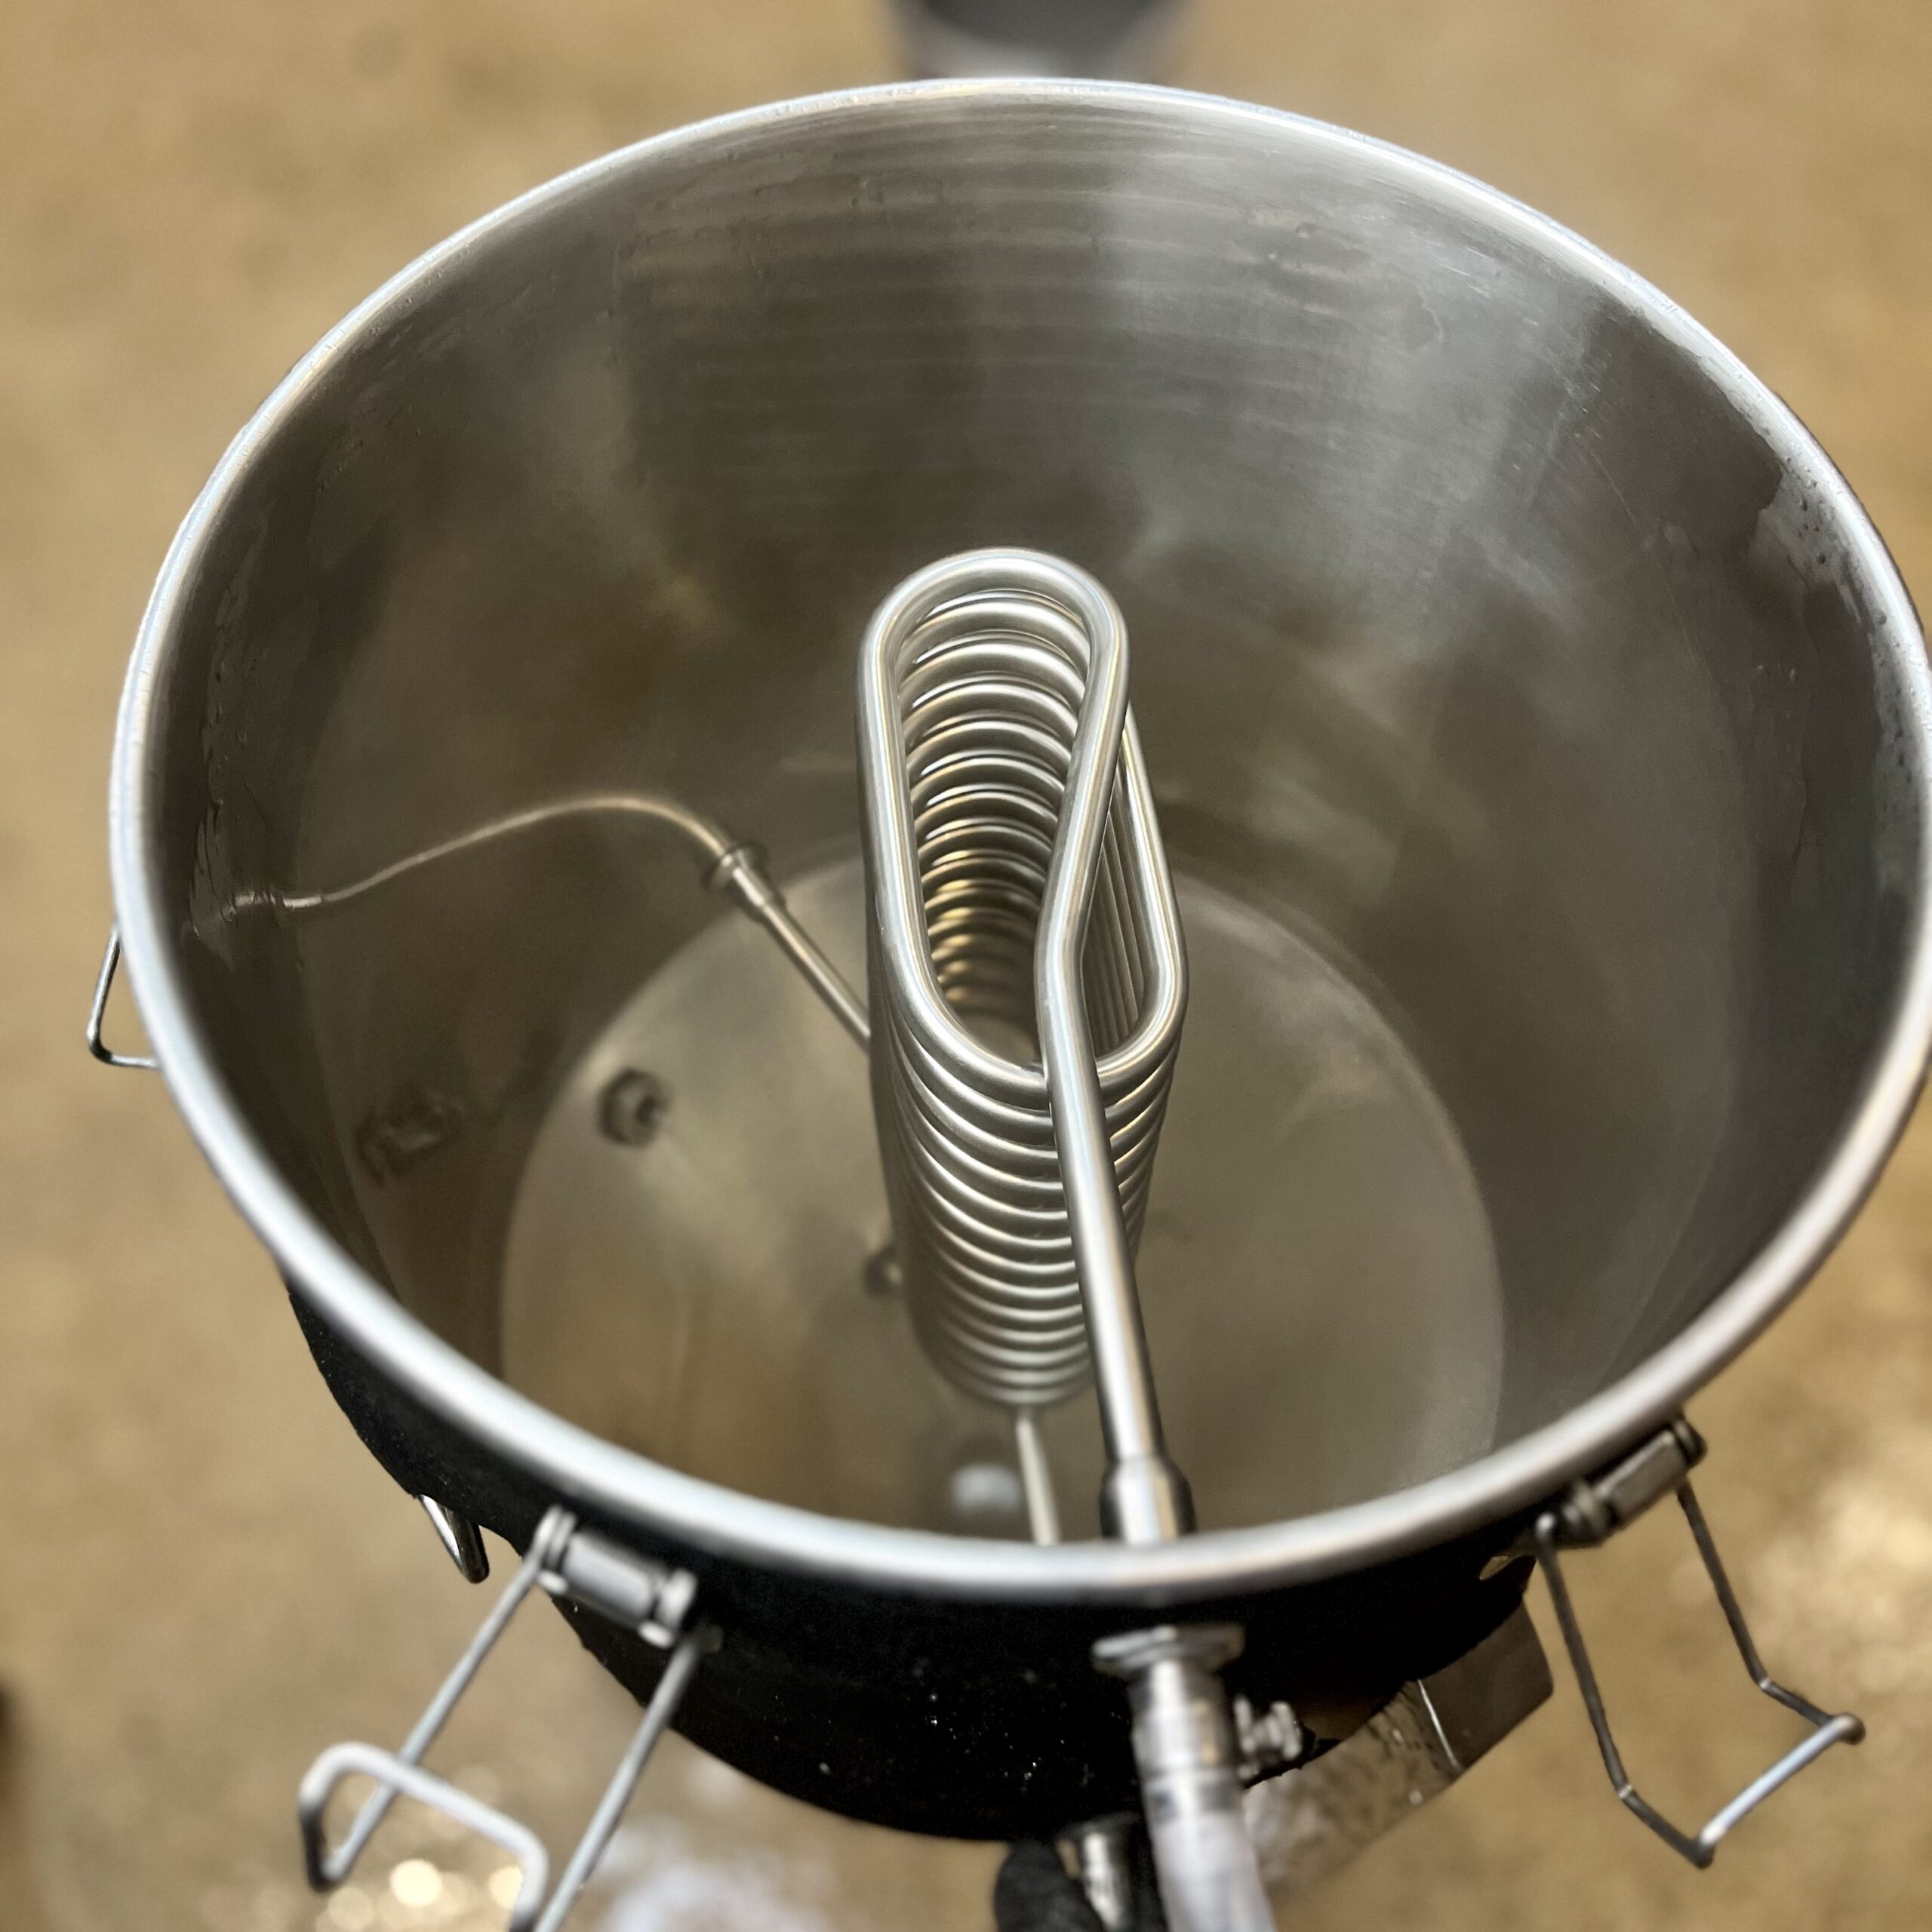 Brewing Cleaning Fermenter with SAFECID